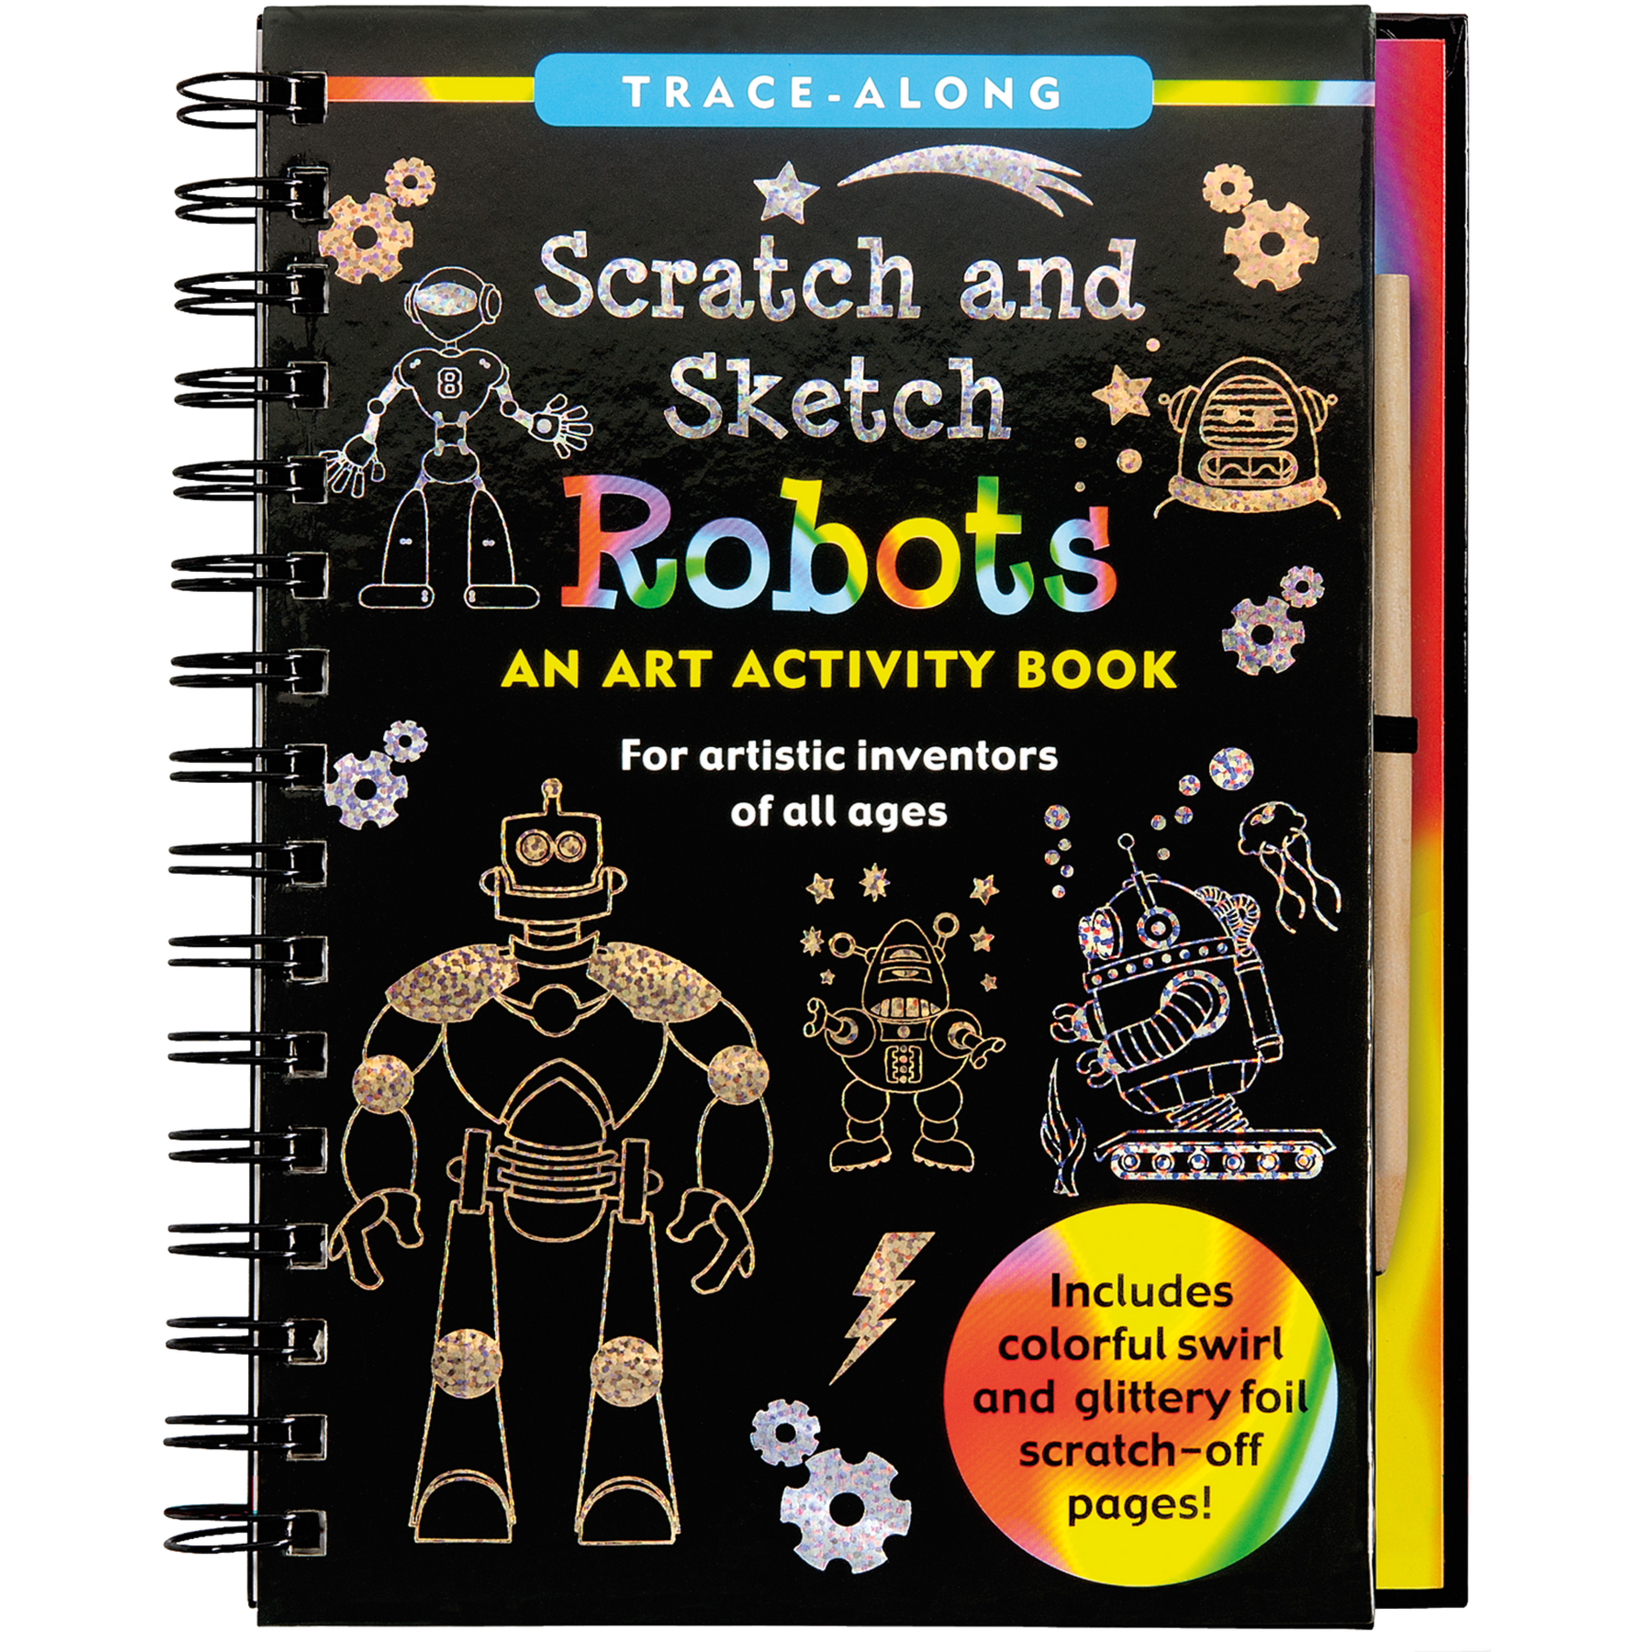 Scratch & Sketch Extreme (Trace-Along): An Art Activity Book for Artists of  All Ages Ready for New Challenges by Peter Pauper Press, Inc., Other Format